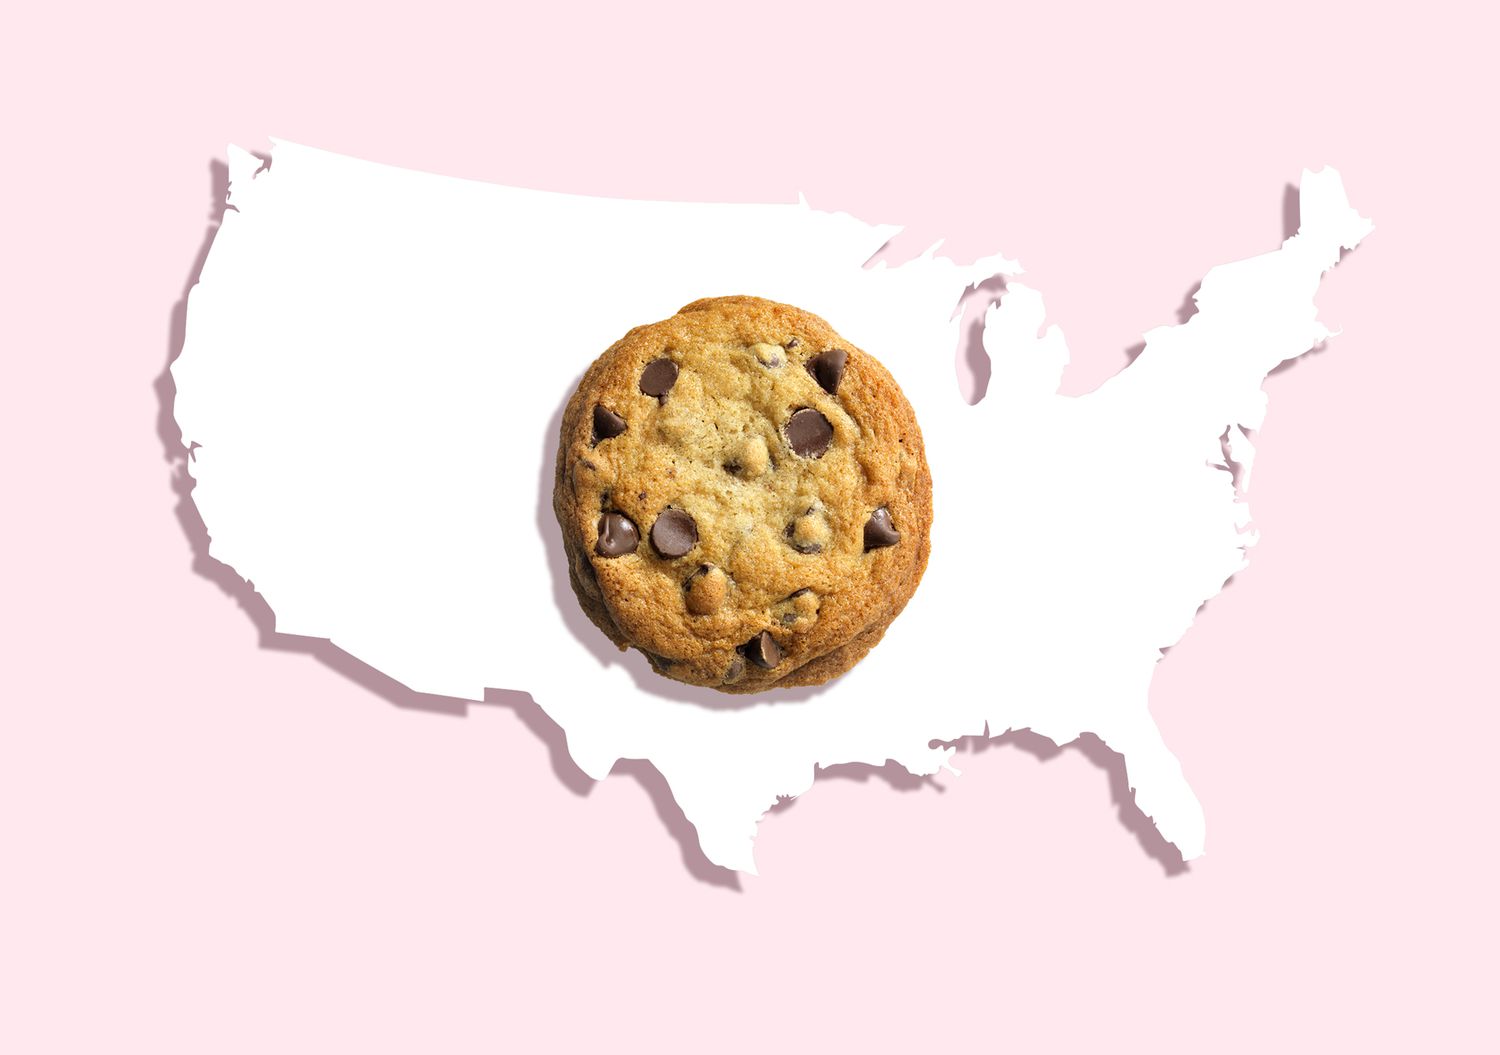 cookie on a map of the US: Most popular Christmas cookies, favorite cookies in America